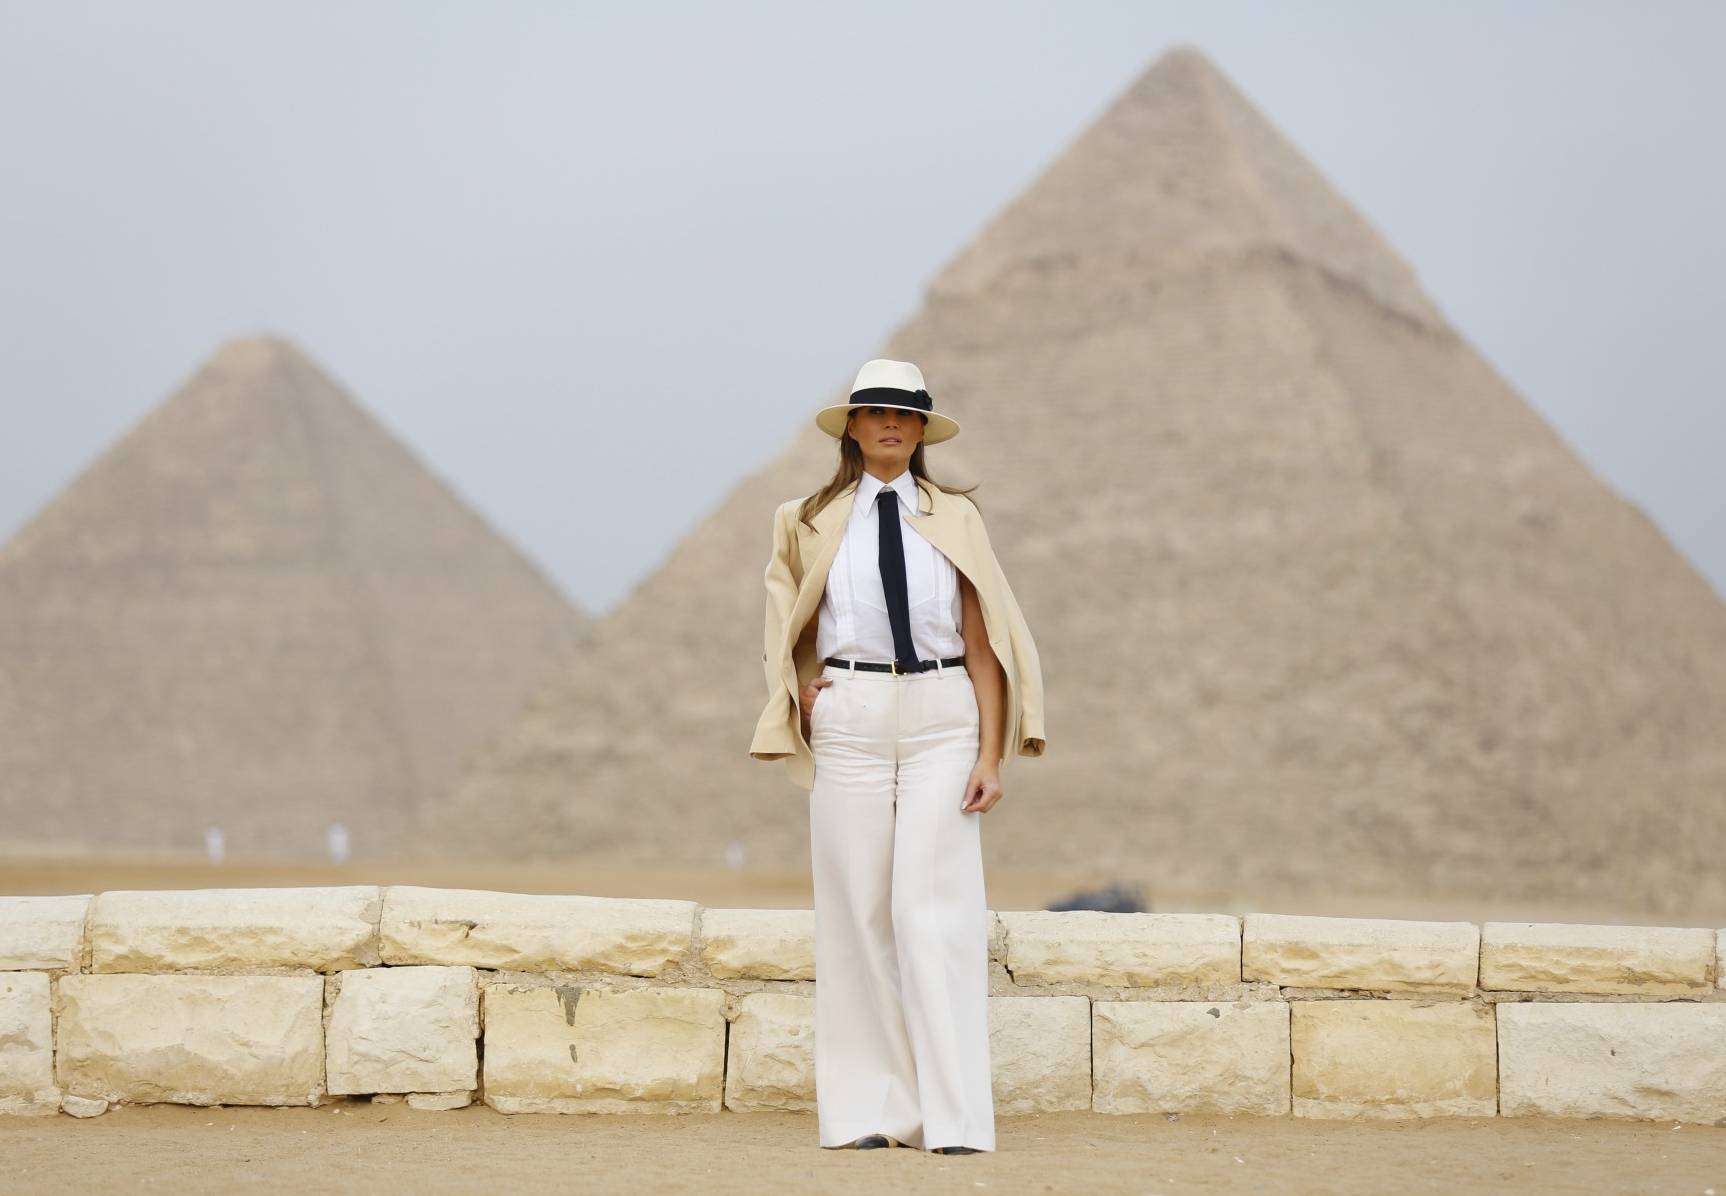 First Lady Trump visits Egypt